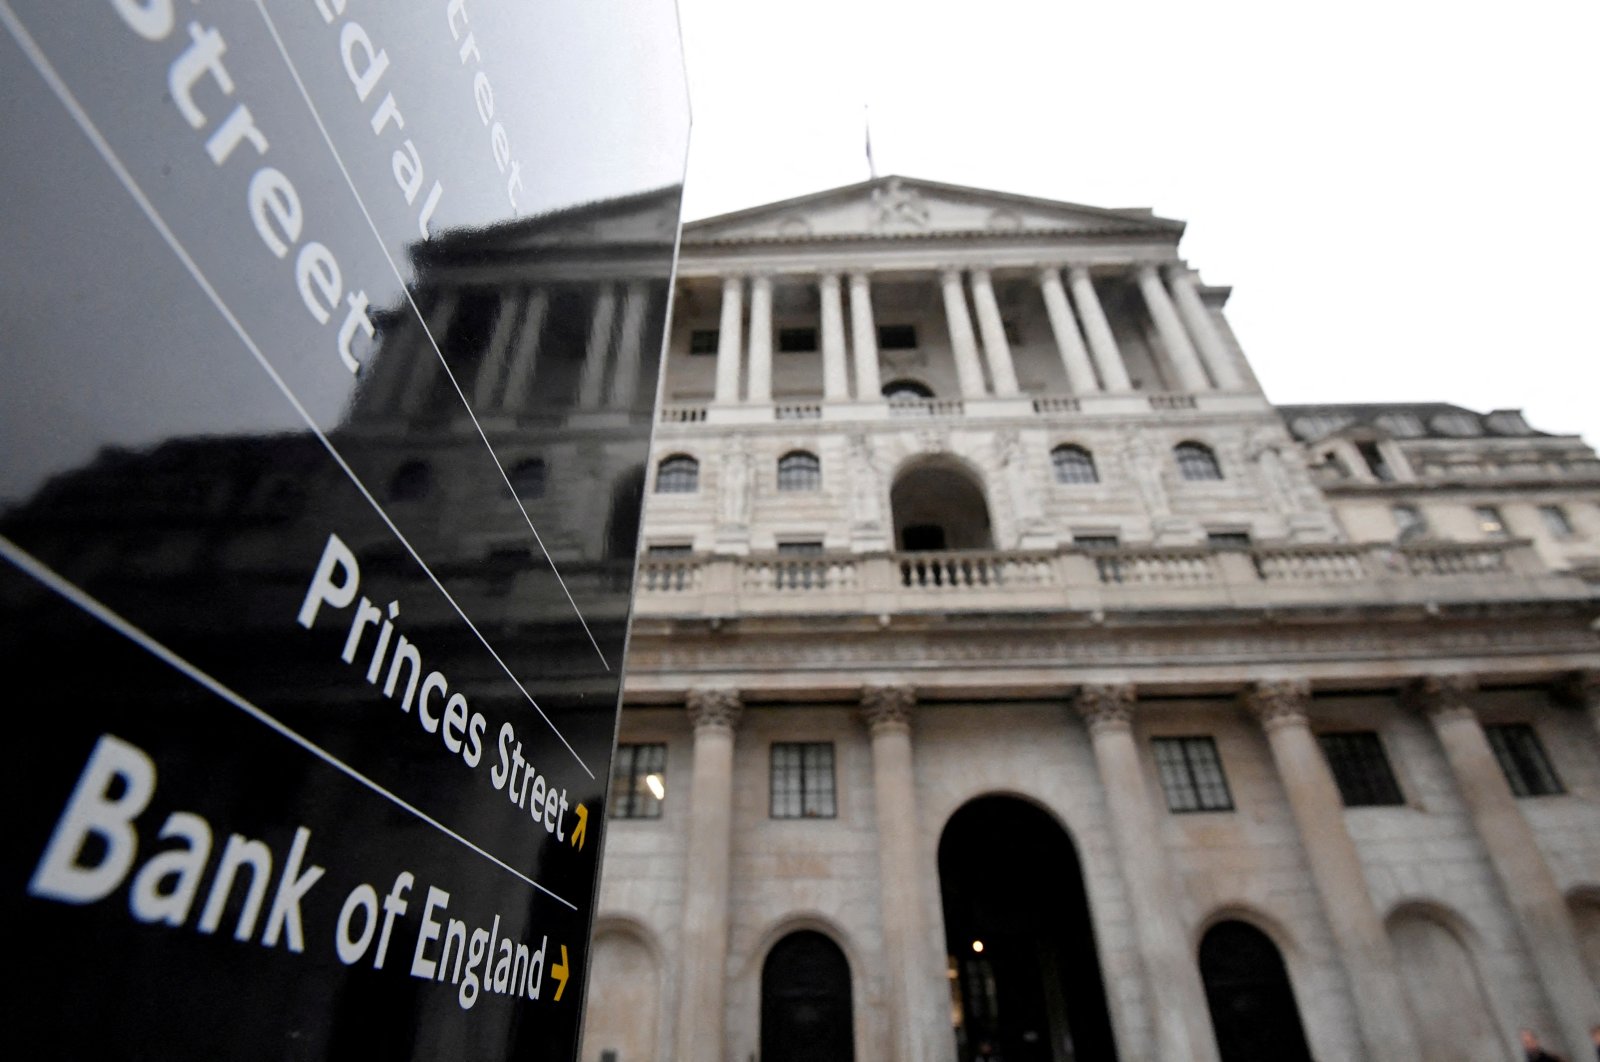 The Bank of England (BoE) building is reflected in a sign, London, Britain, Dec. 16, 2021. (Reuters Photo)